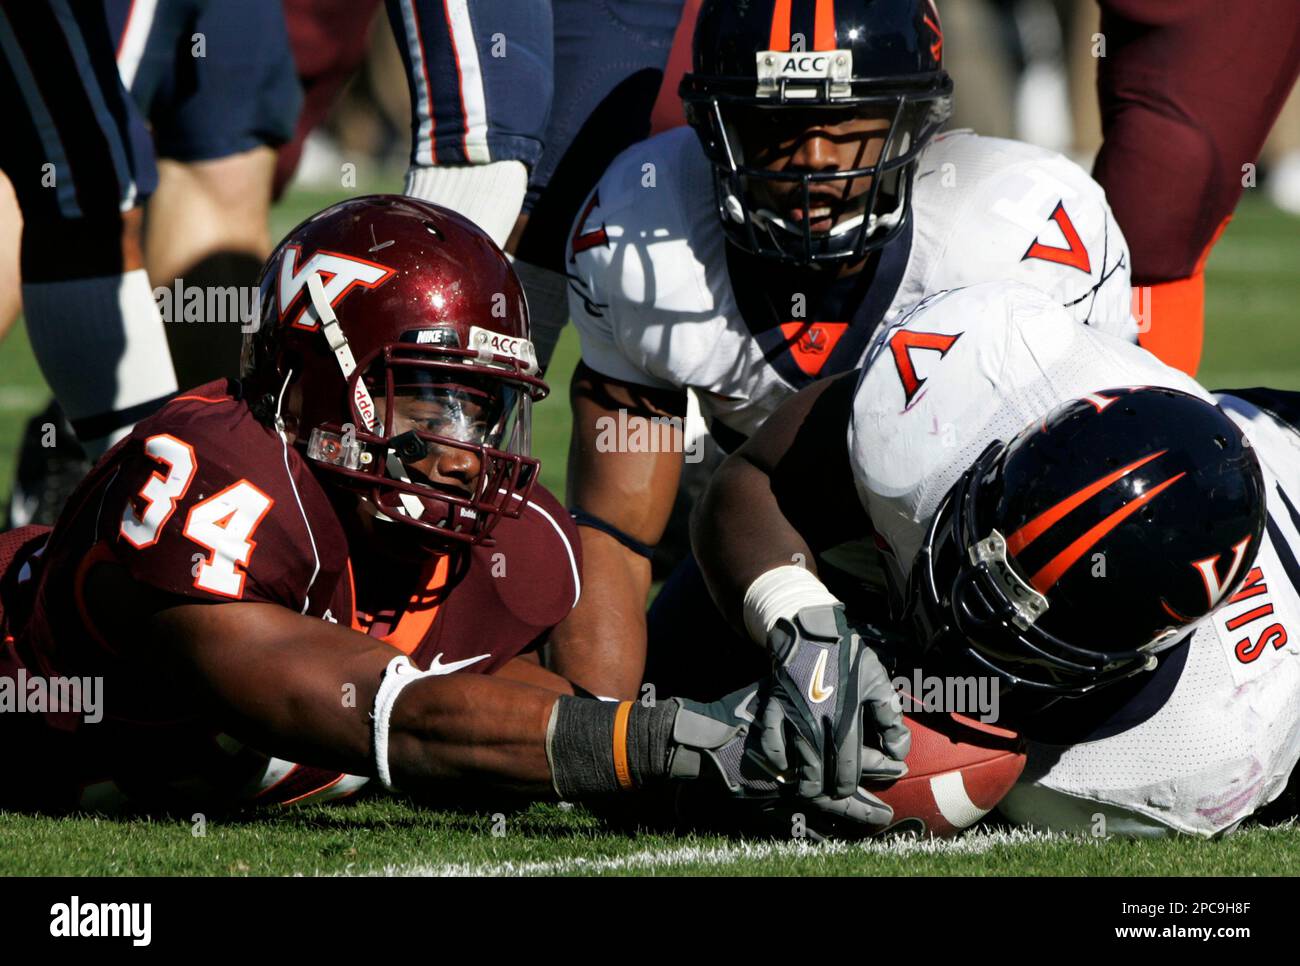 Virginia Tech running back George Bell (34) tries to stretch the ball  across the goal line as Virginia linebacker Clint Sintim (51) grabs the  ball during the Virginia-Virginia Tech college football game